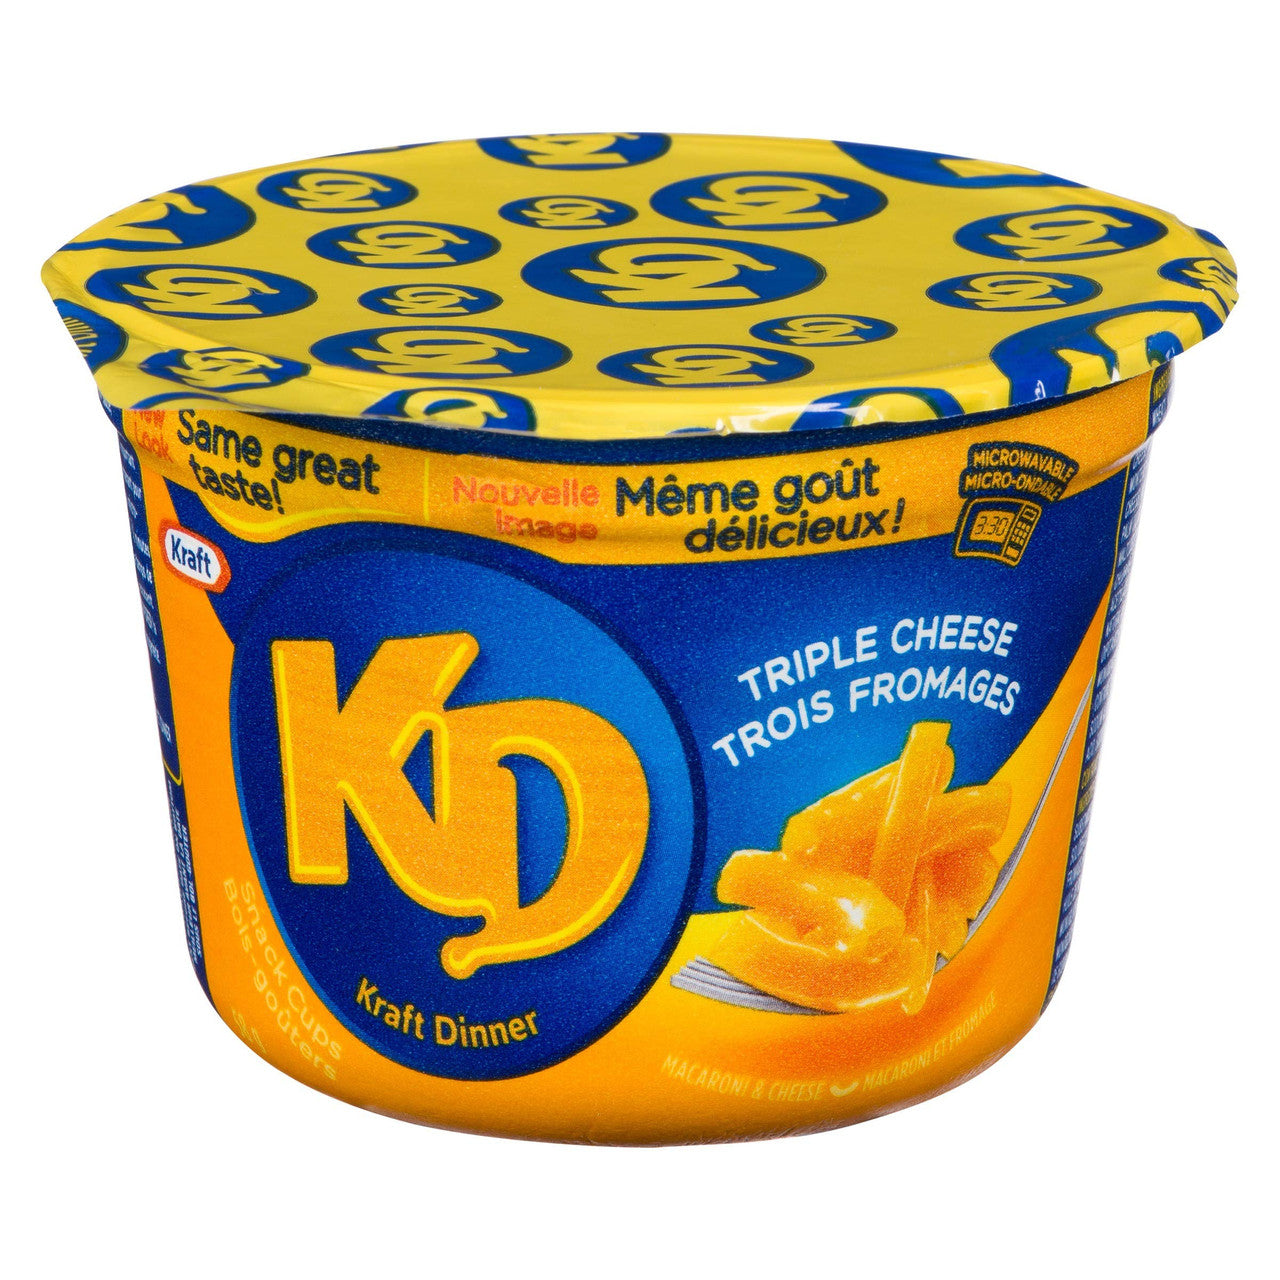 KD KRAFT DINNER Snack Cups - Three Cheese Macaroni & Cheese 58g,10ct. (Imported from Canada)